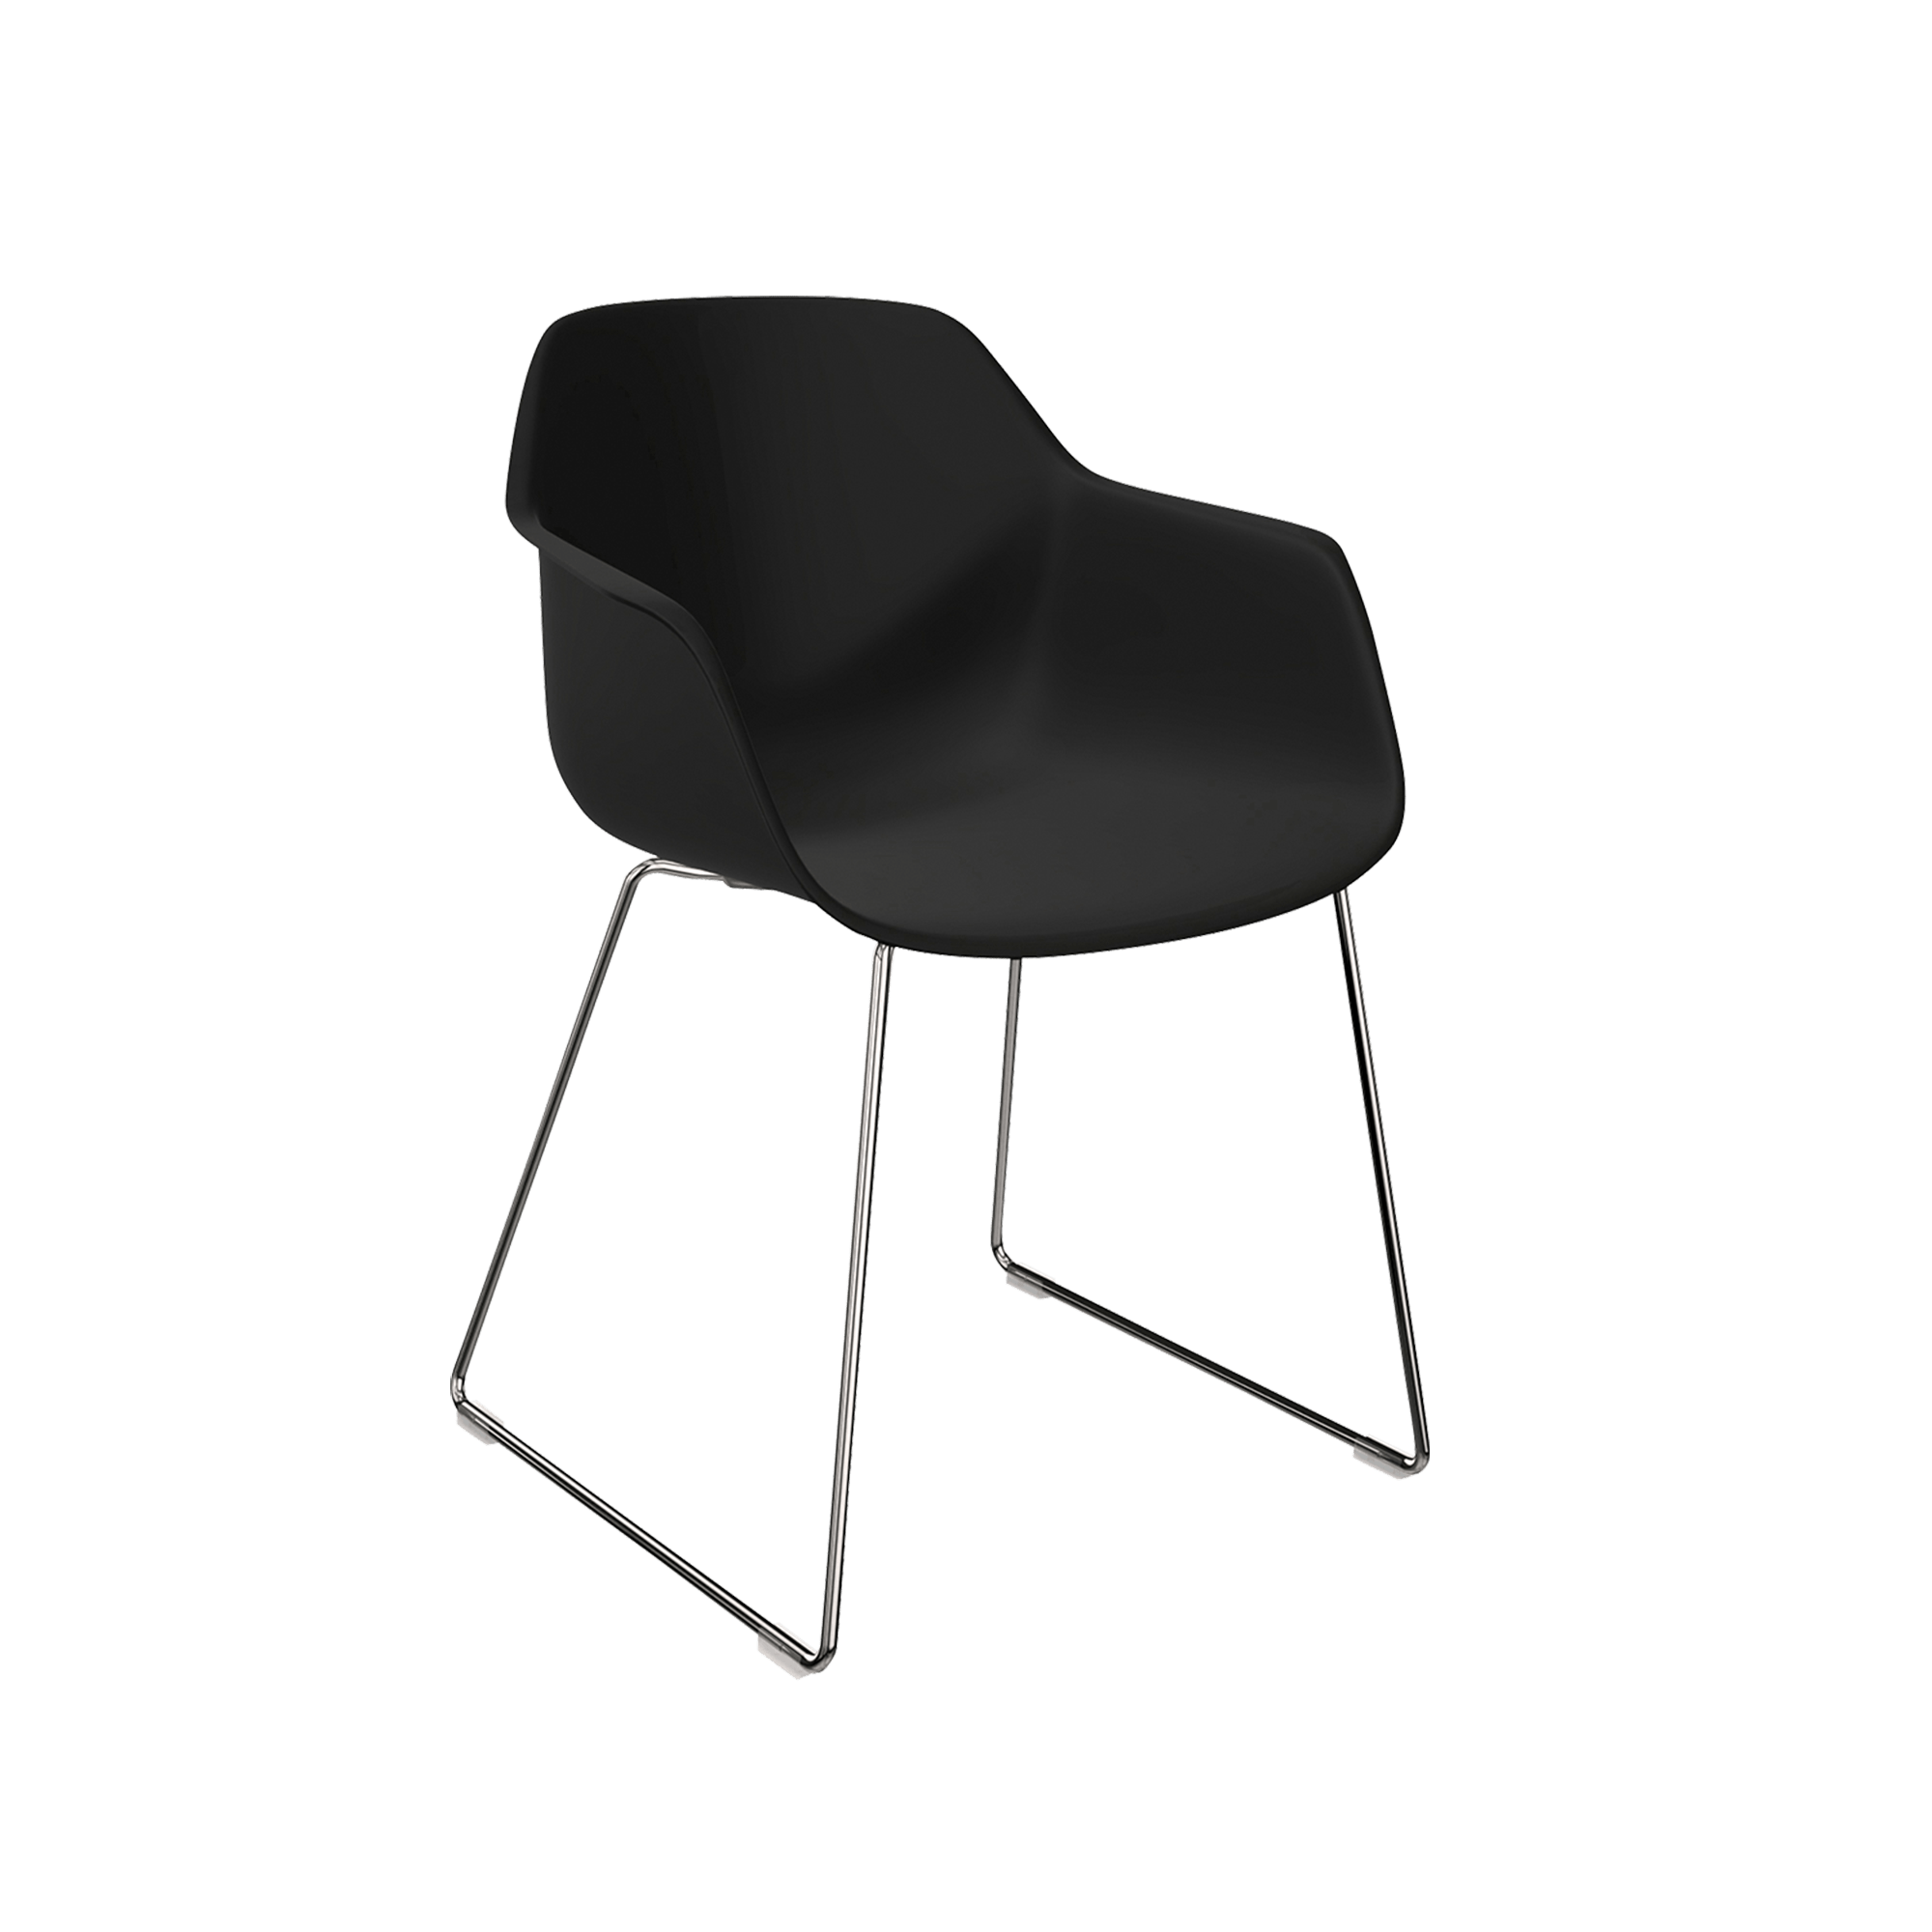 black chair with two legs